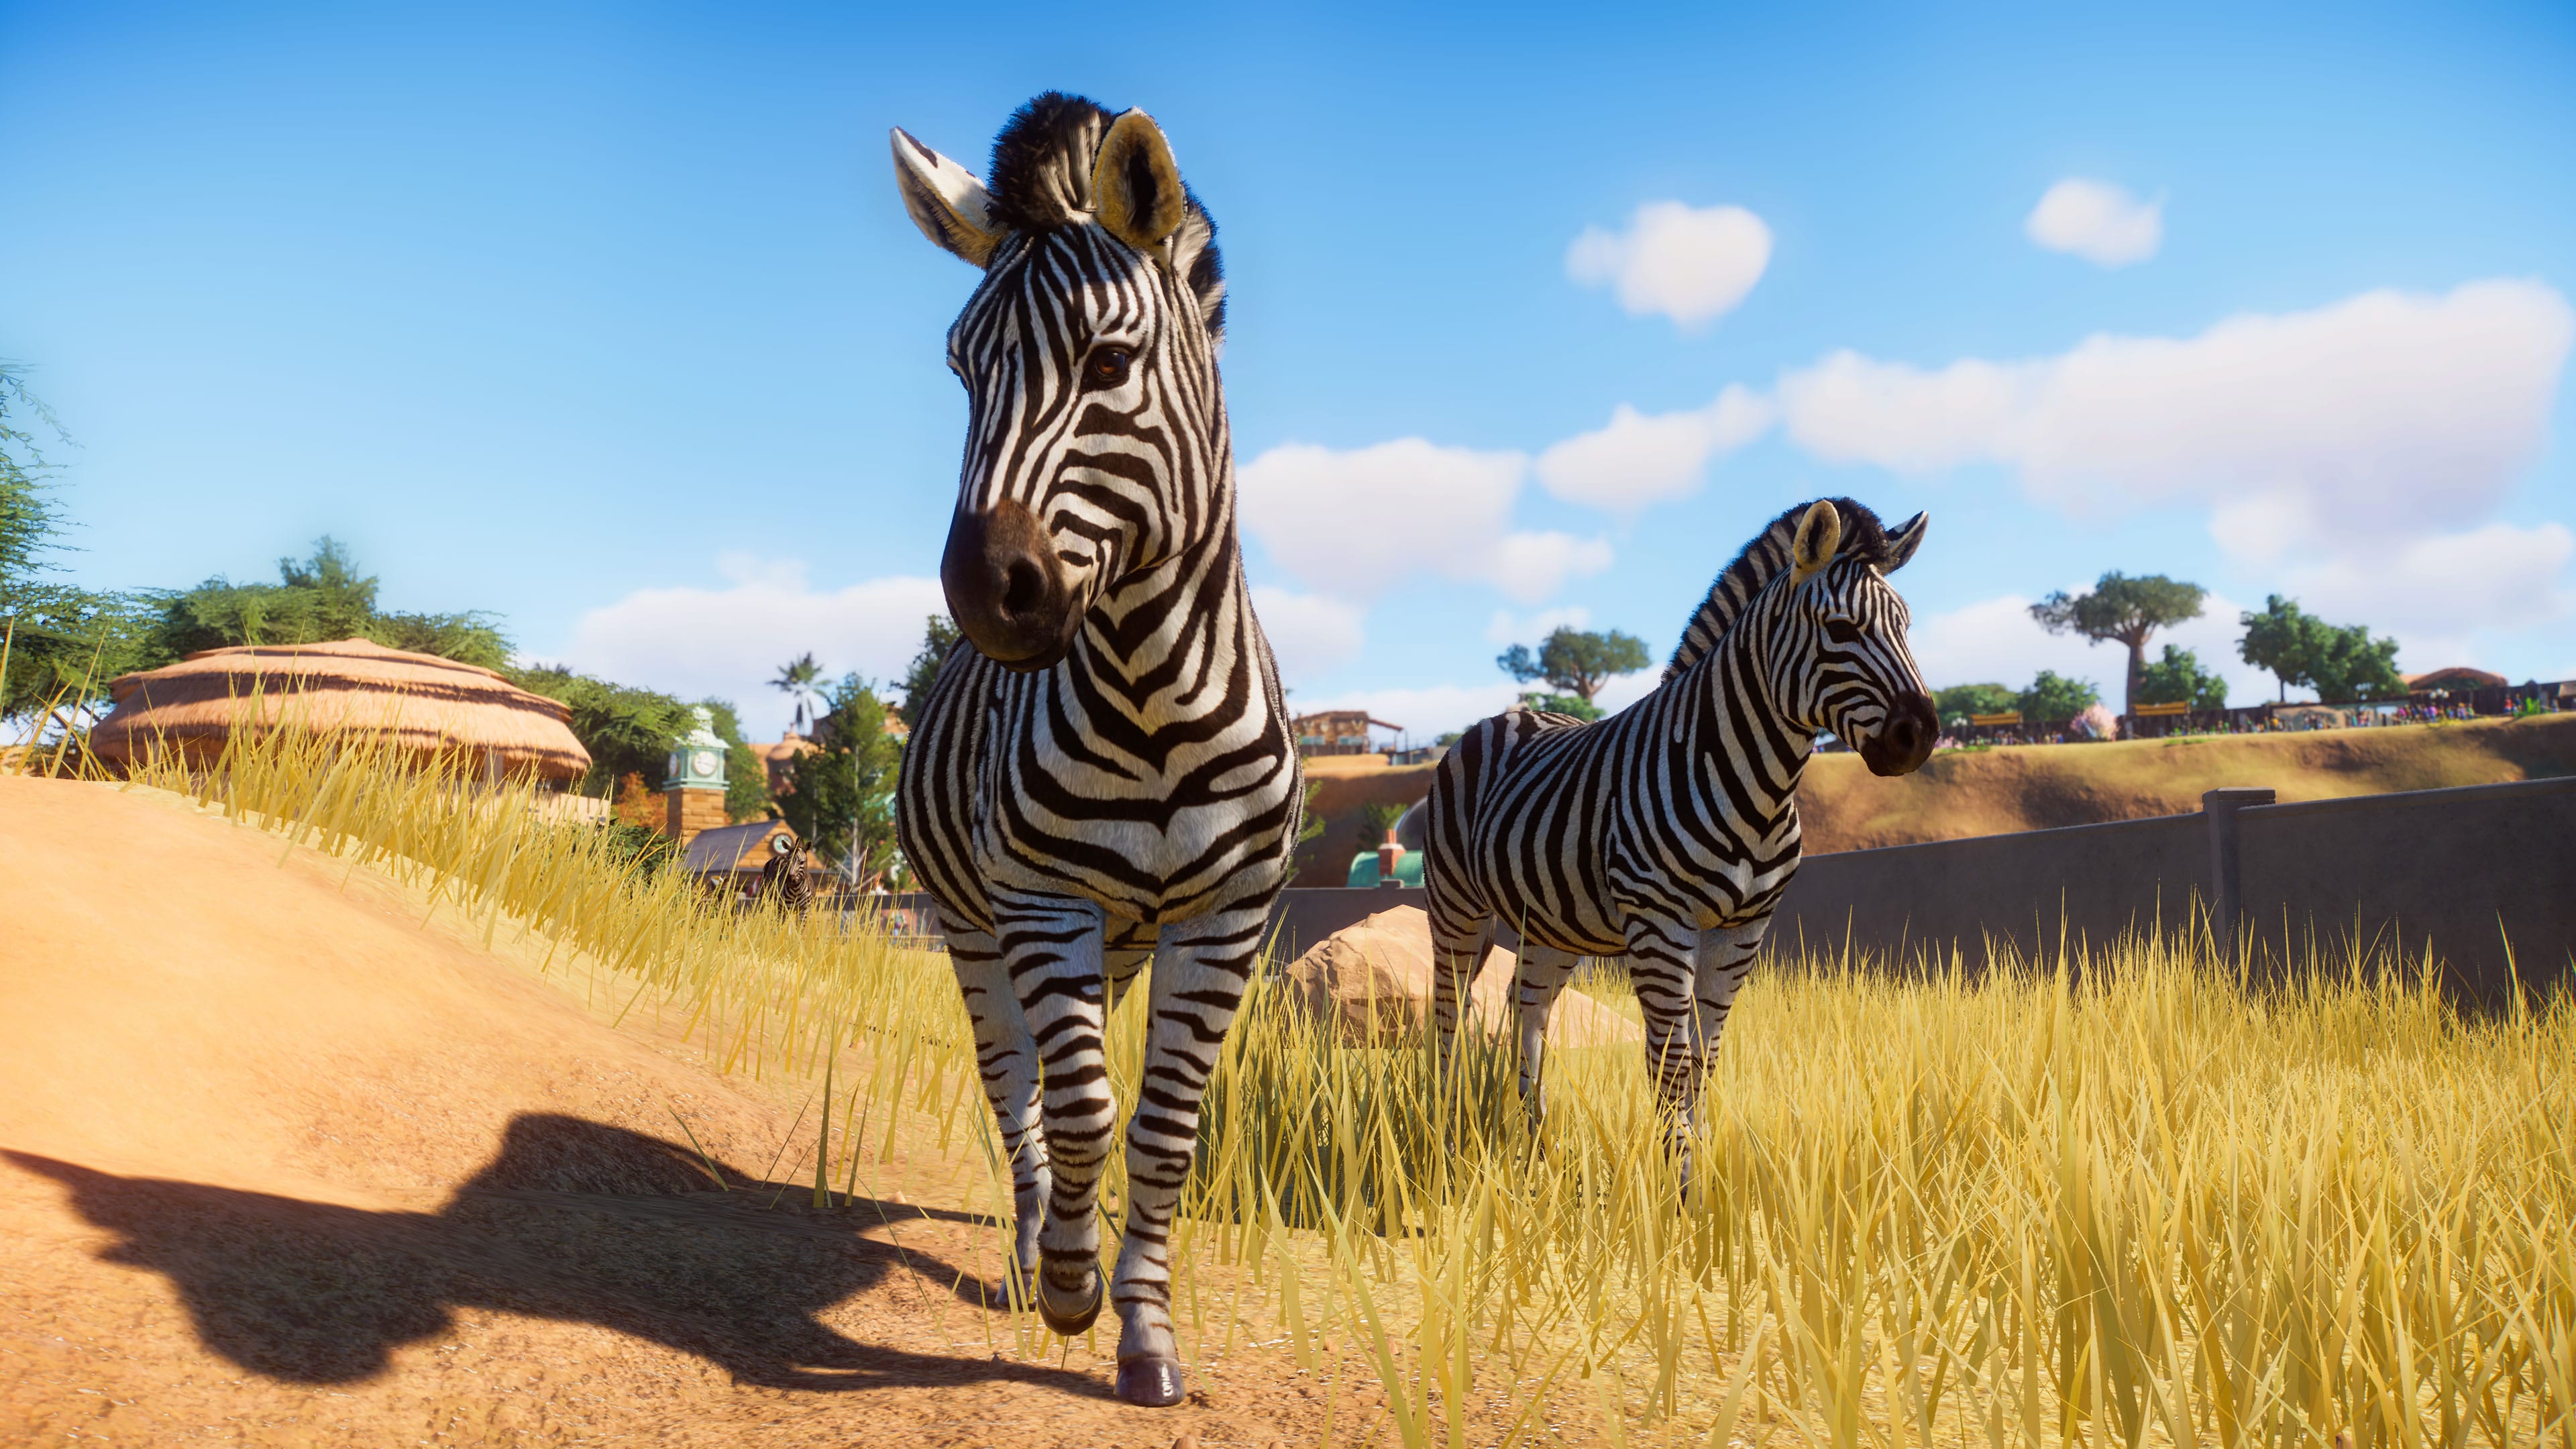 Planet Zoo will feature 